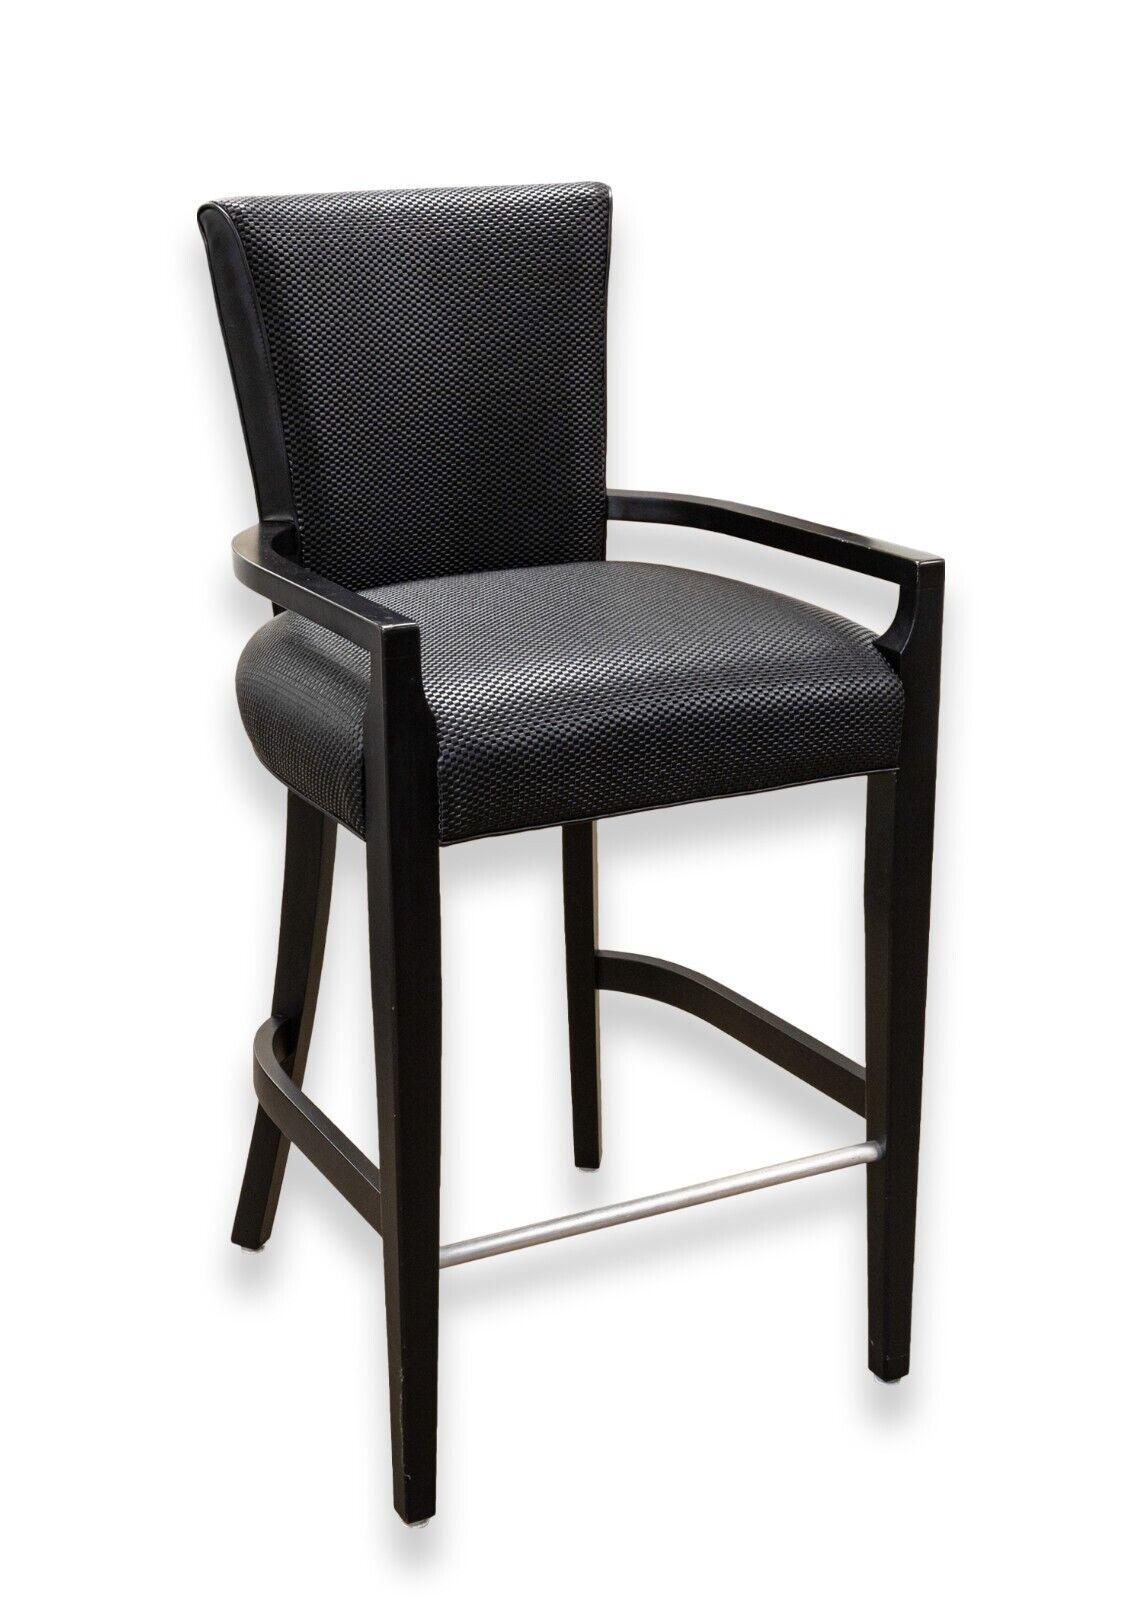 A contemporary modern pair of woven black leather and wood bar height barstools. A very handsome pair of black barstools. These stools feature a black wood construction with aluminum details, and a woven black leather upholstery. These chairs are